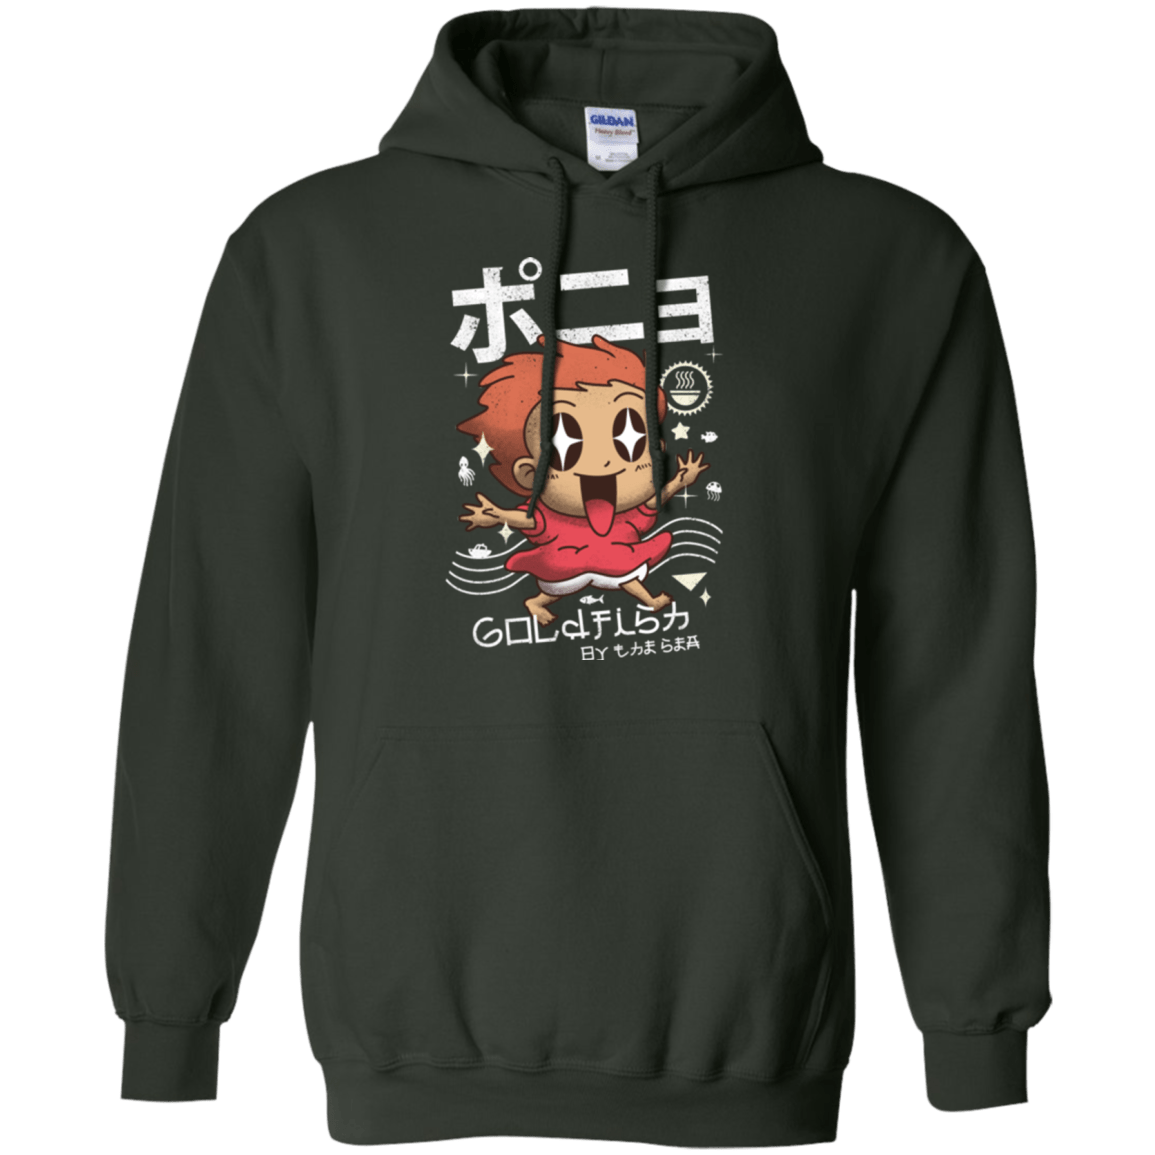 Sweatshirts Forest Green / Small Kawaii Gold Fish Pullover Hoodie